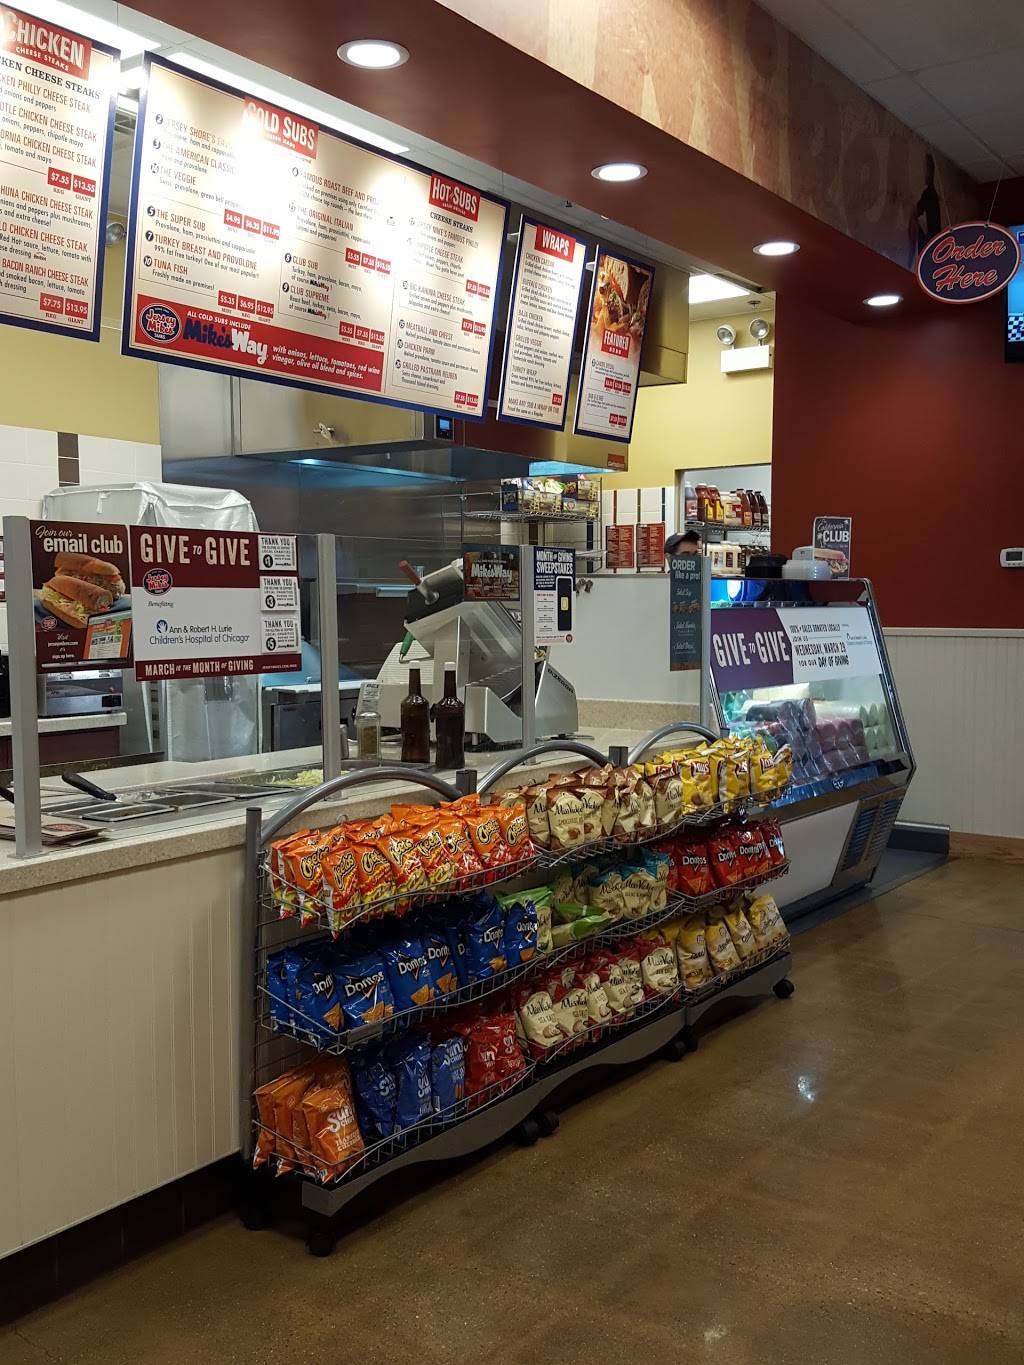 jersey mike's bartlett il